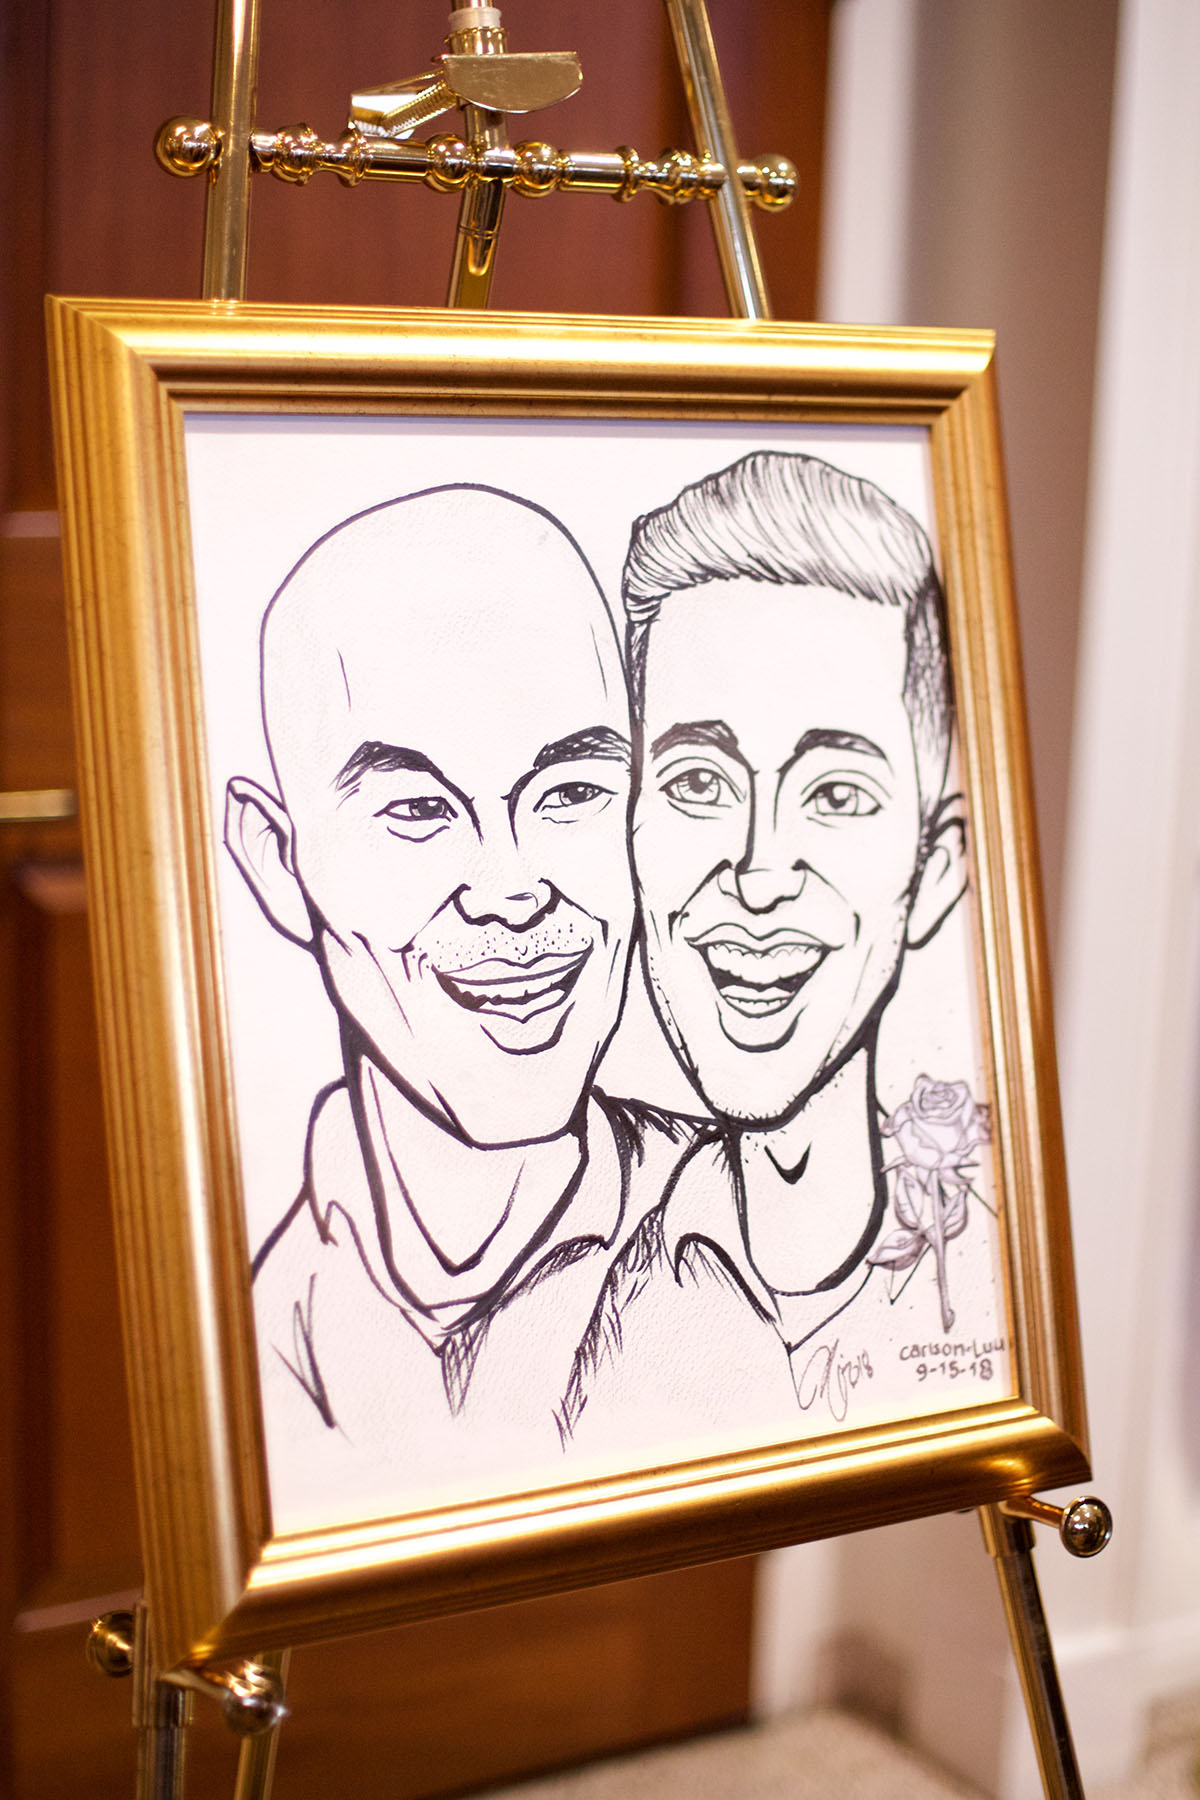 You'll want to a be a guest at this couple's Beauty and the Beast inspired wedding framed caricature